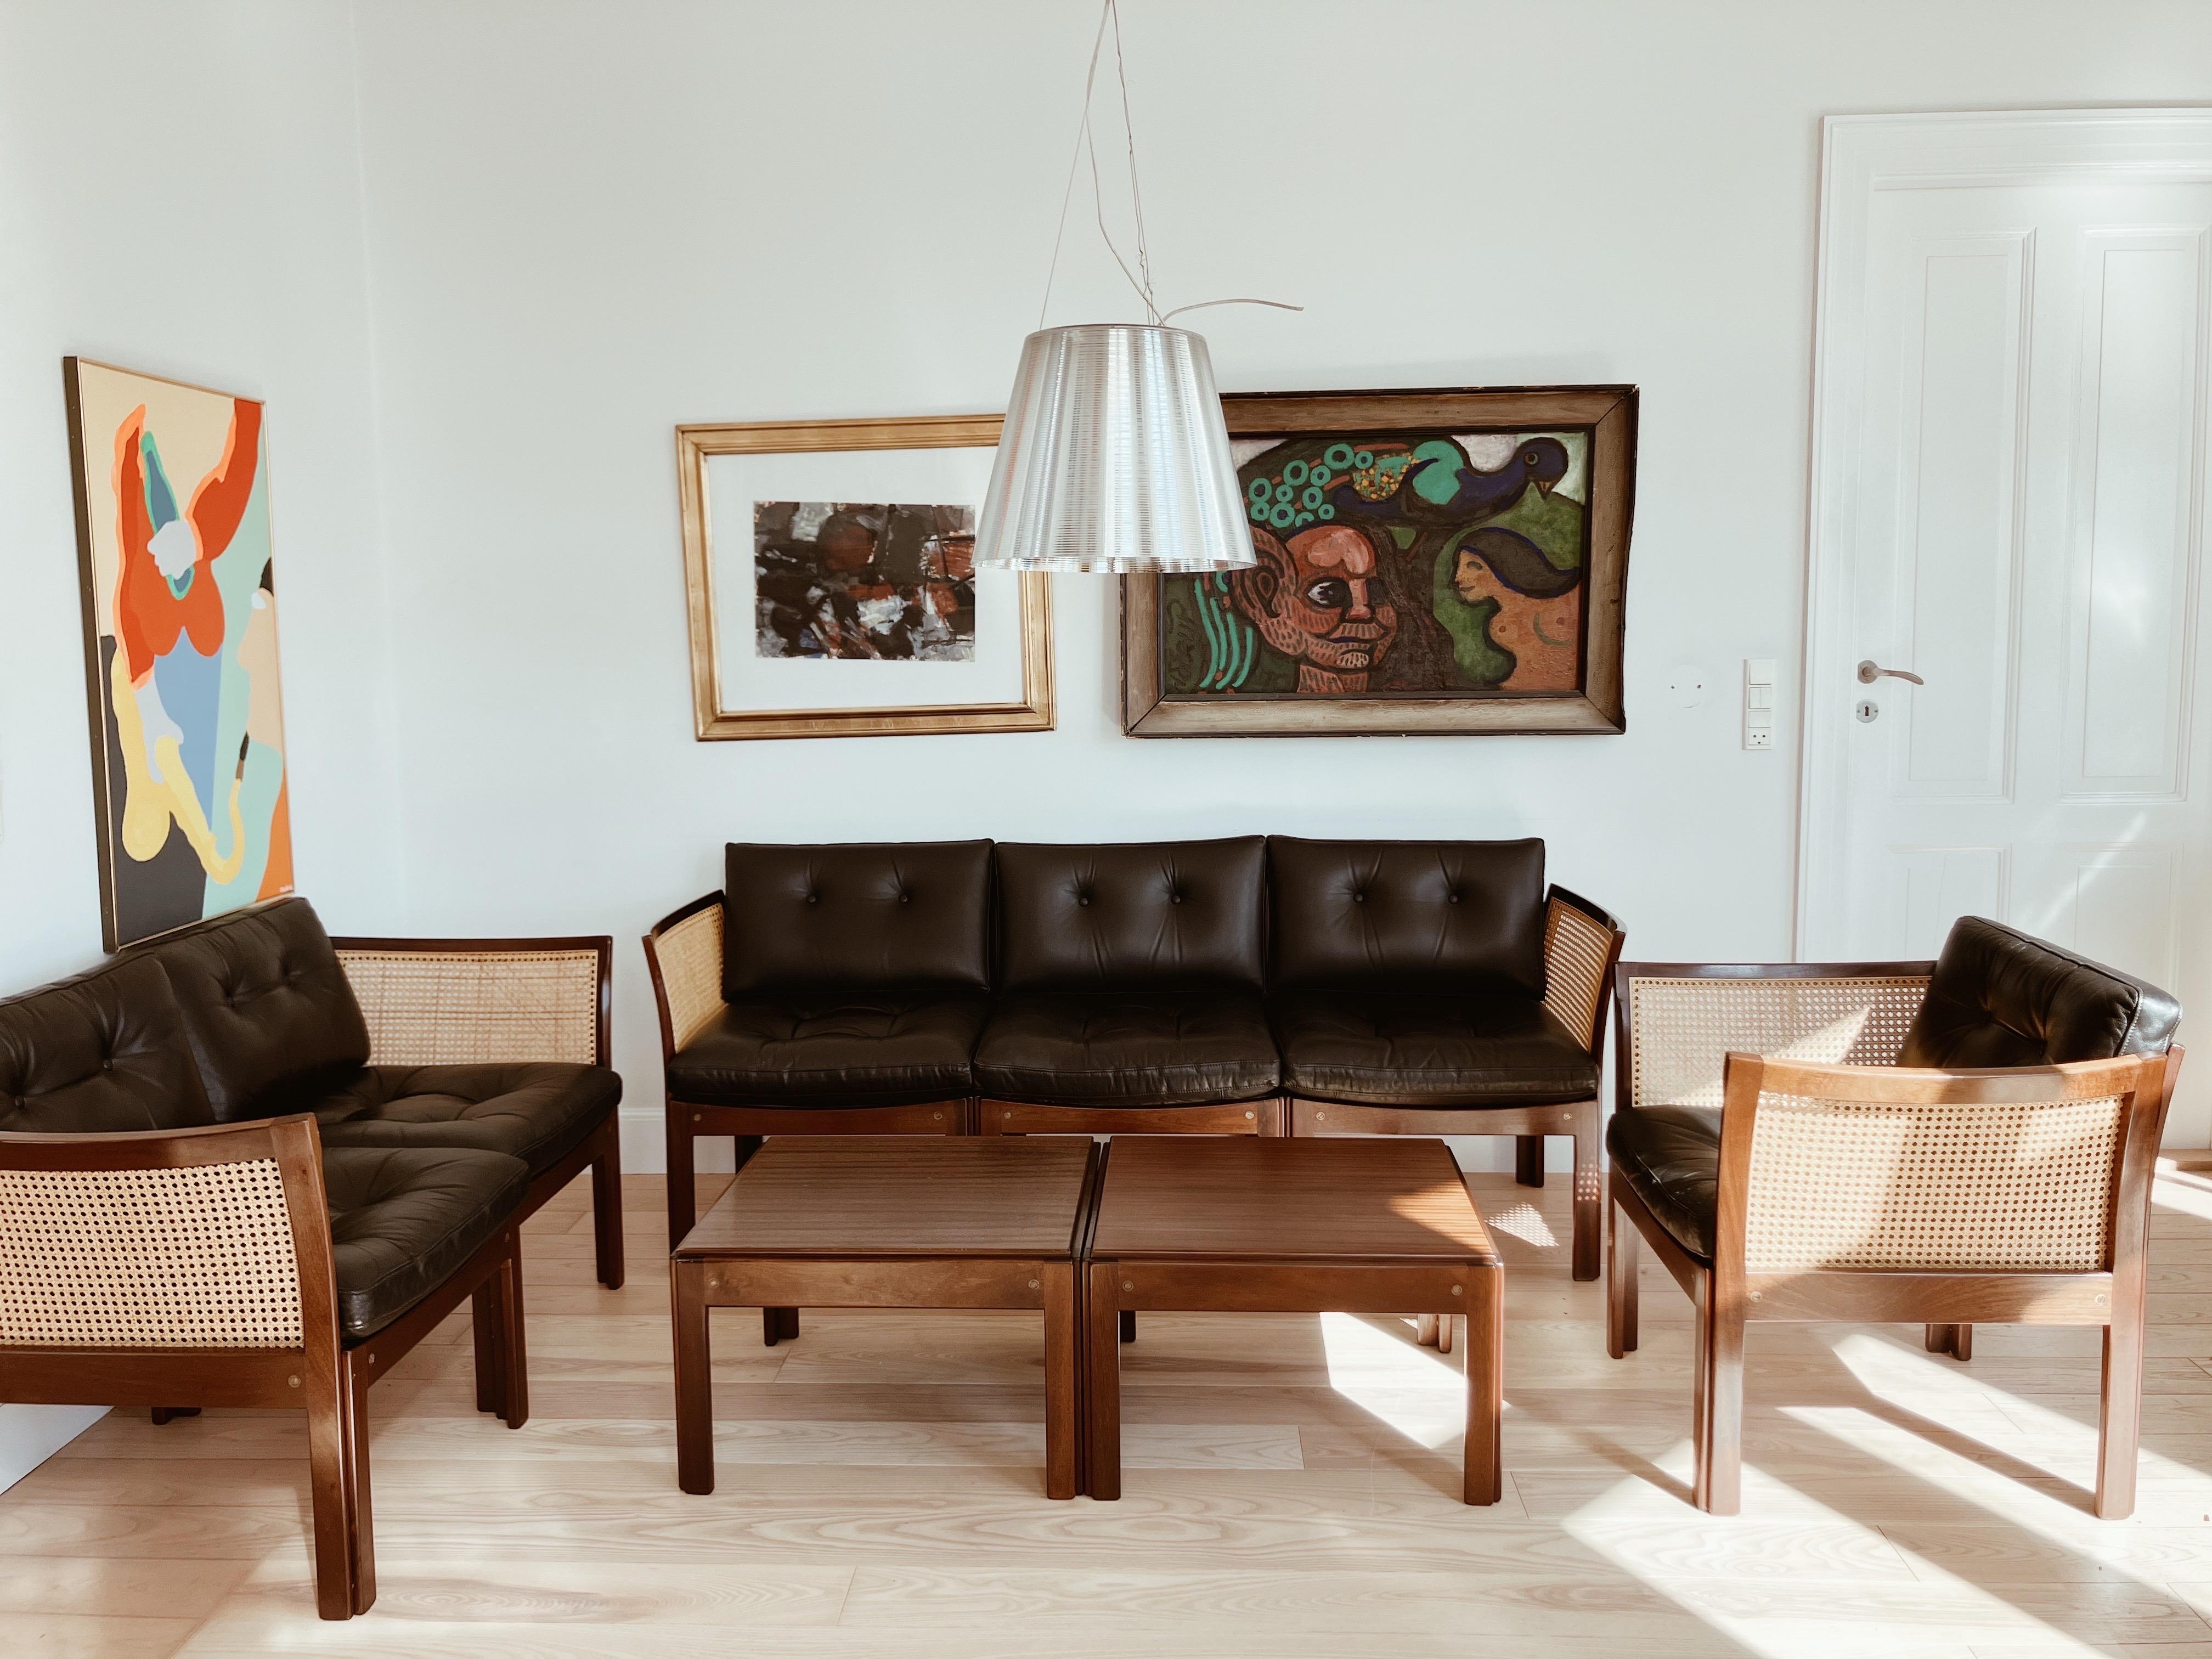 Danish Design - in excelent condotion

“Plexus” Living room set designed by Illum Wikkelsø in the 1960s. Manufactured by CFC Silkeborg Furniture, Denmark. 

The woven cane is in perfect condition - no cracks! The leather and wood is with minimal